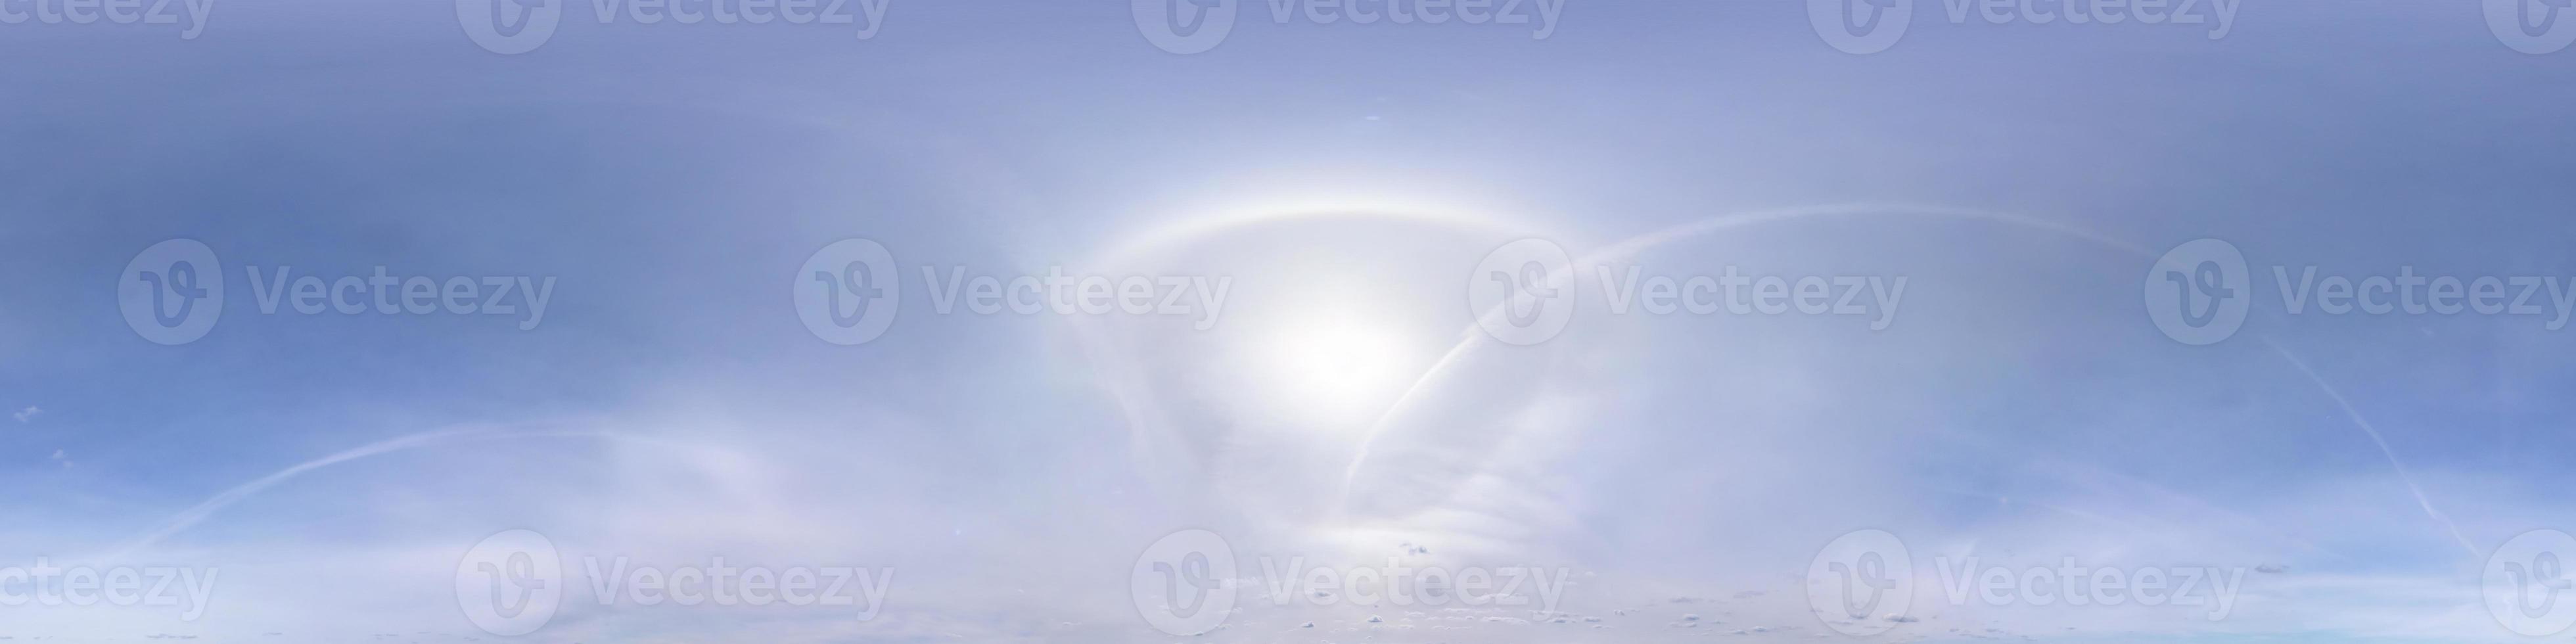 clear blue sky with halo sun. Seamless hdri panorama 360 degrees angle view with zenith for use in 3d graphics or game development as sky dome or edit drone shot photo